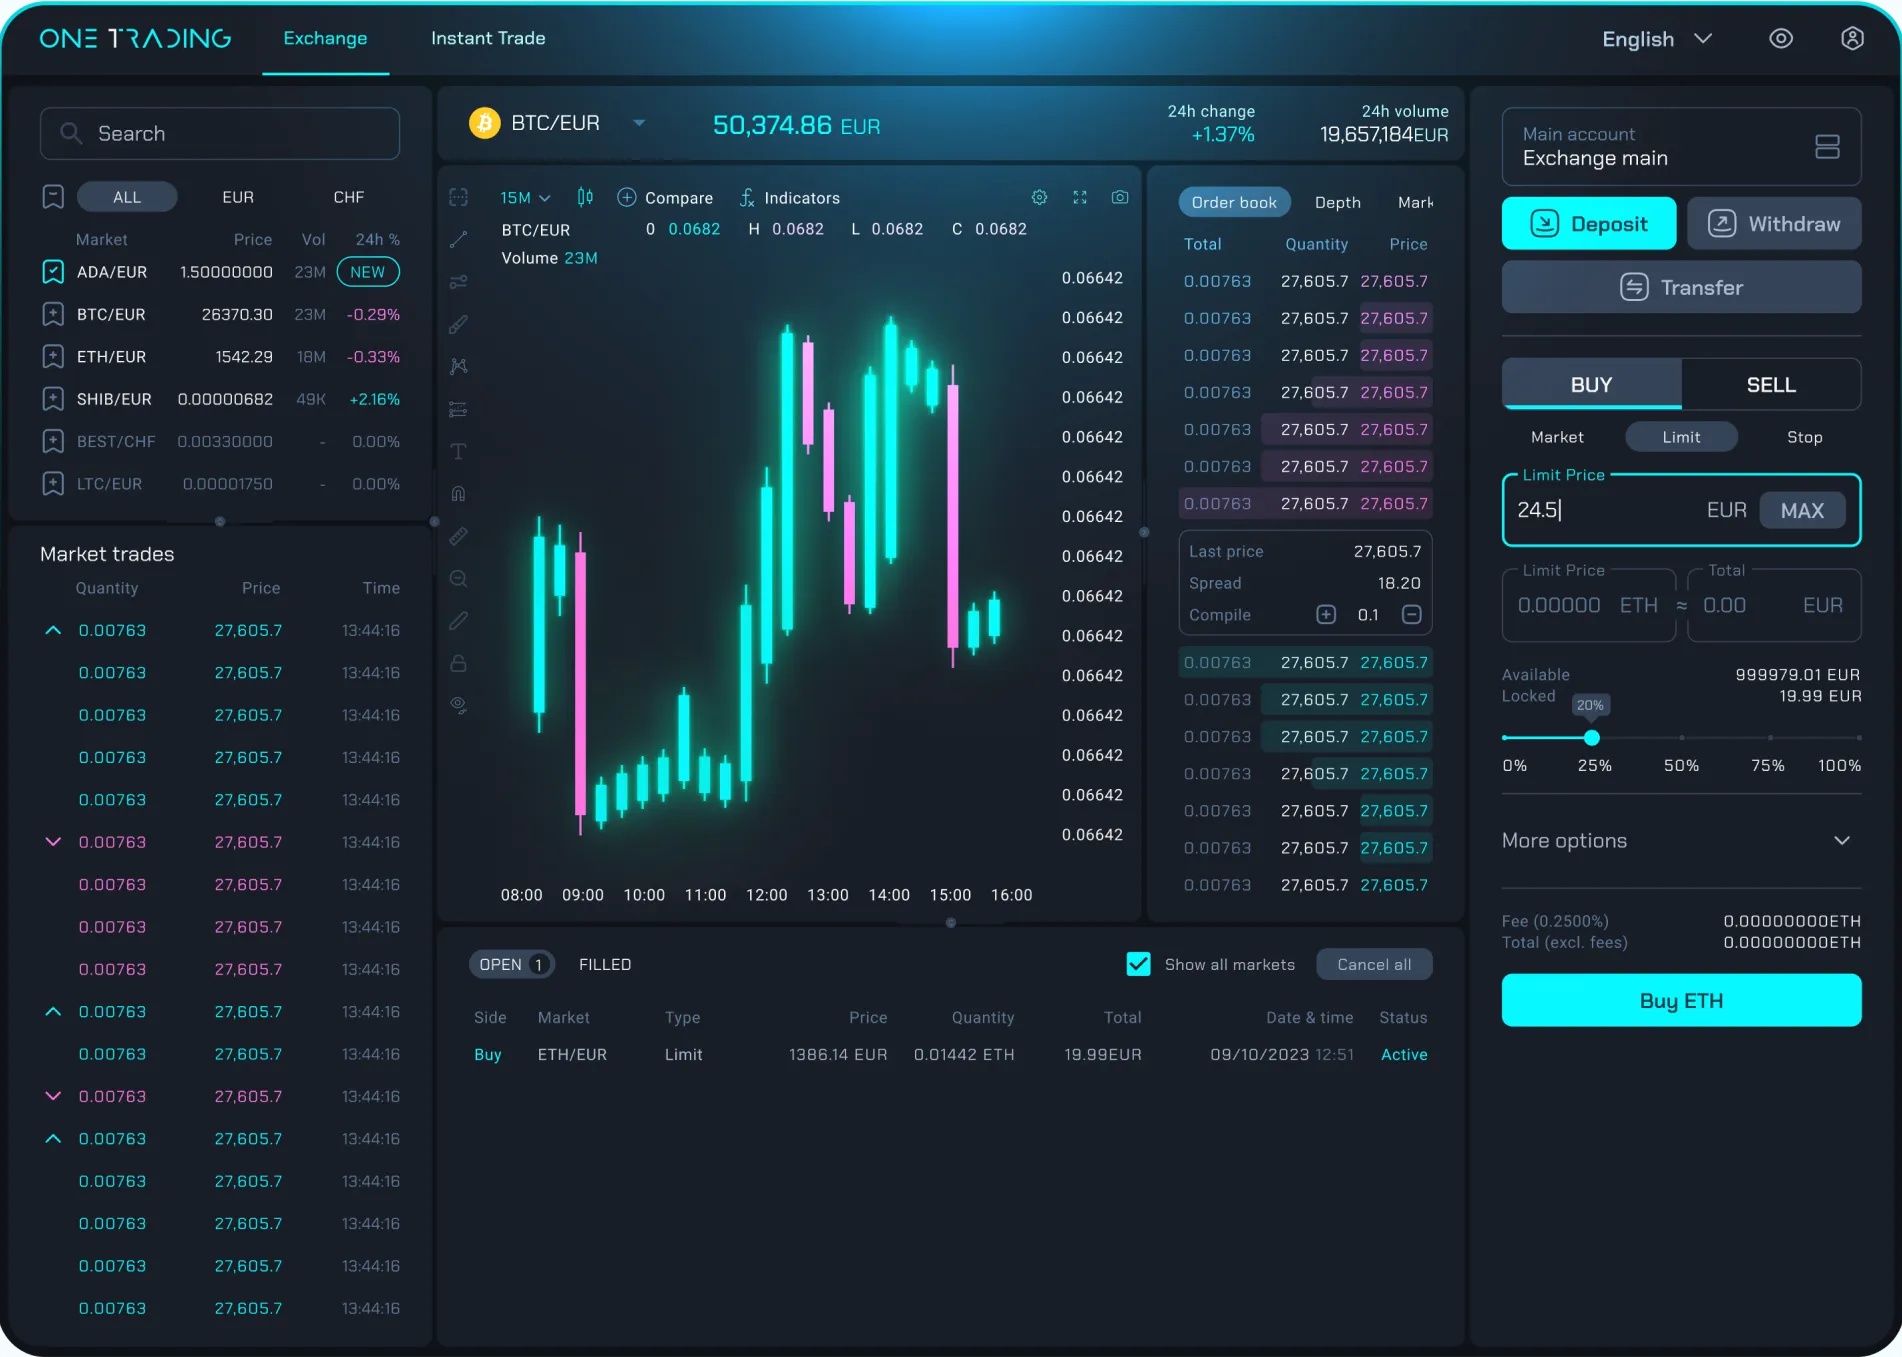 Image of One Trading's website